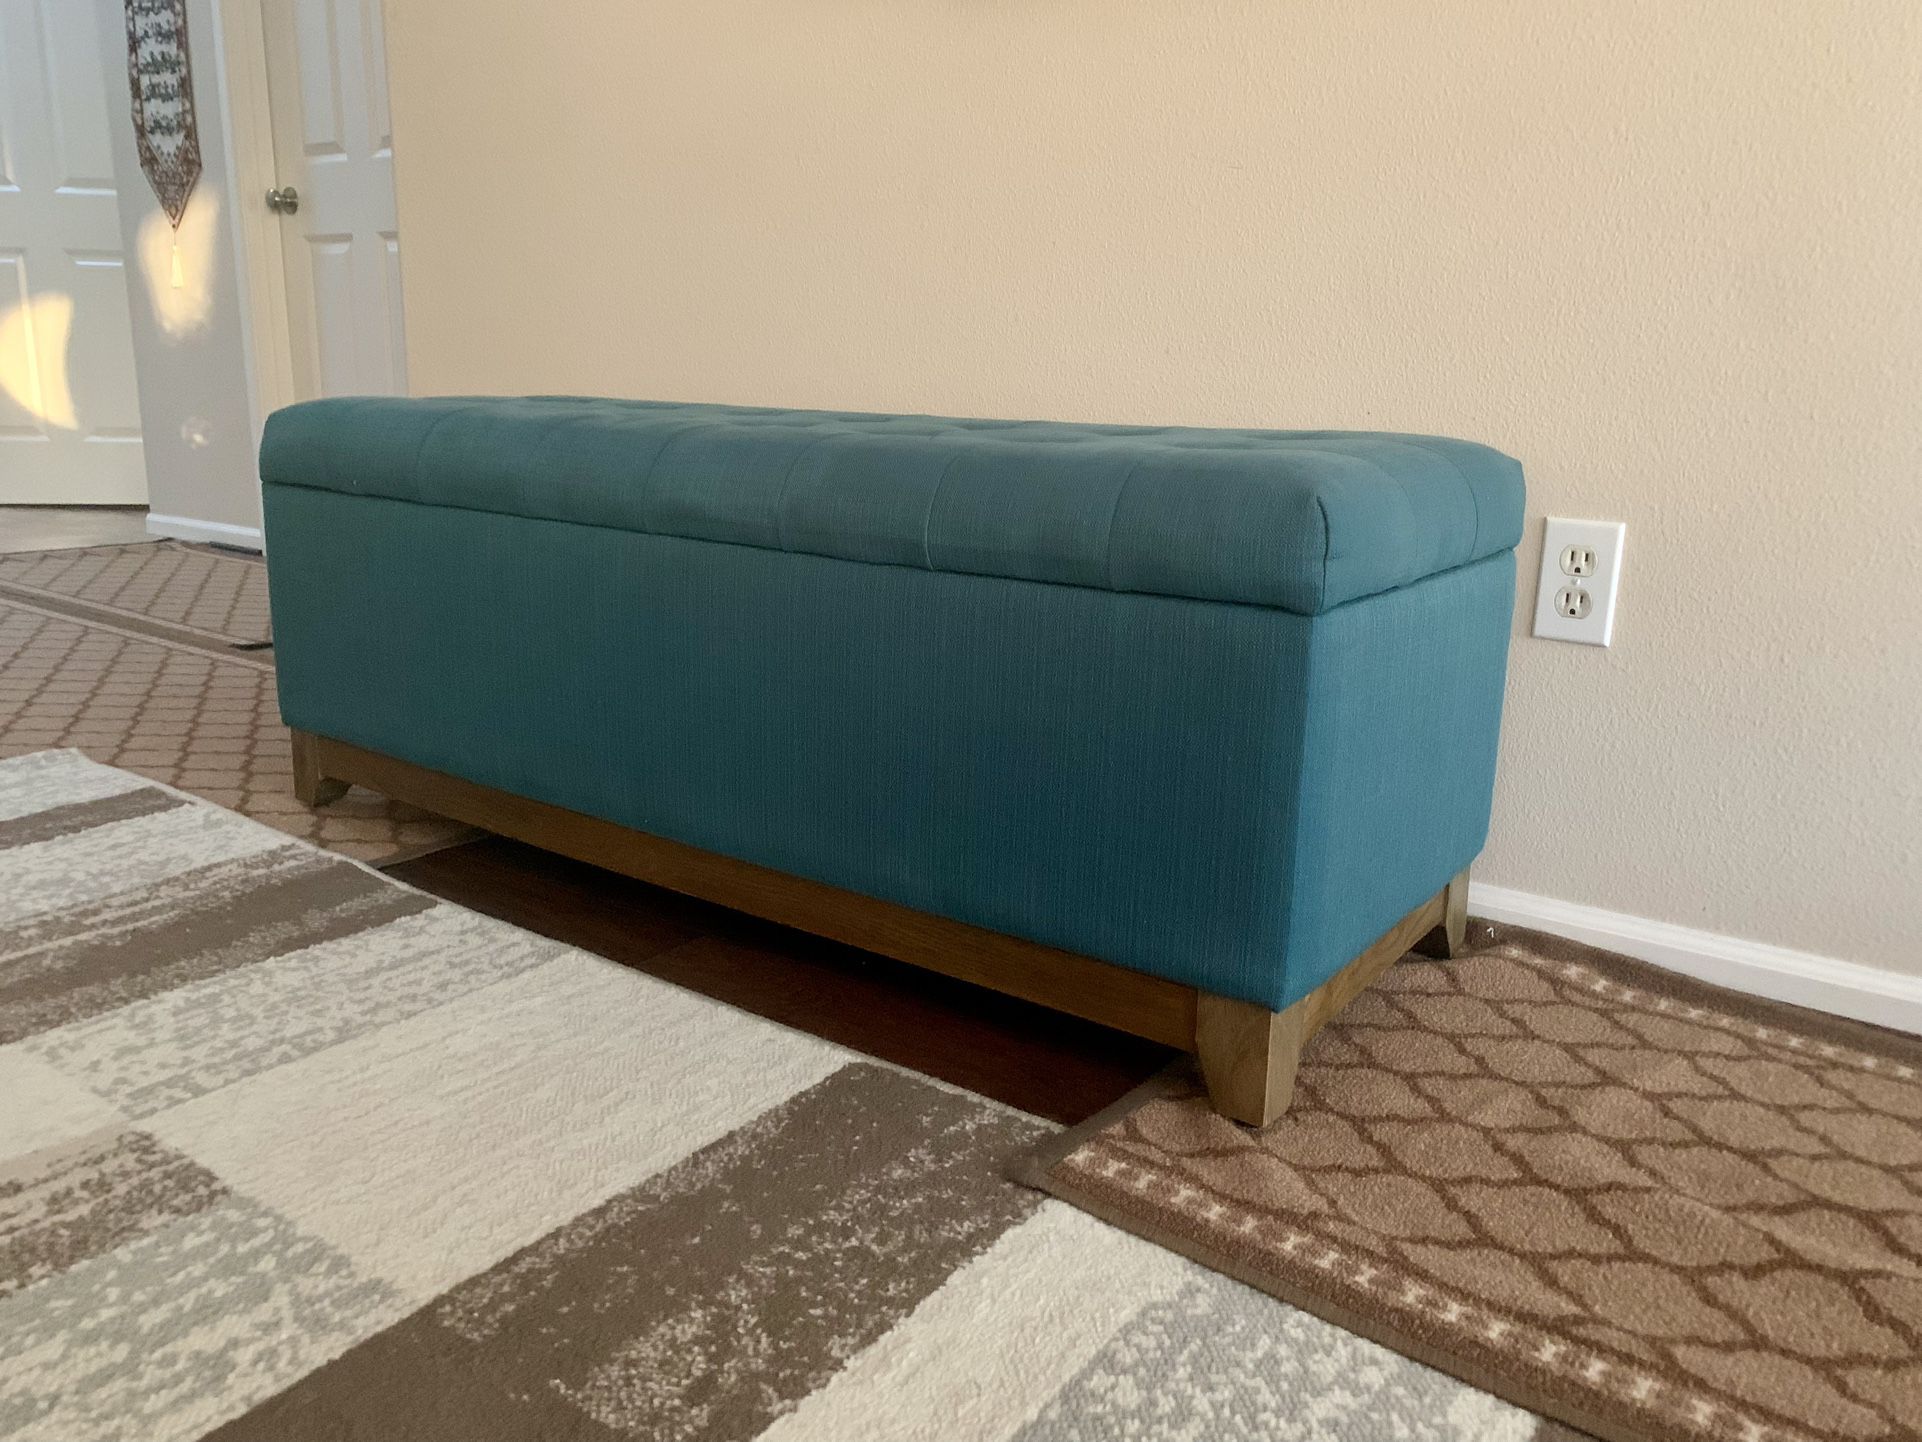 Ottoman Bench (For Storage) With a Hinged Lid, 120x40x40 CM, Mint Green 